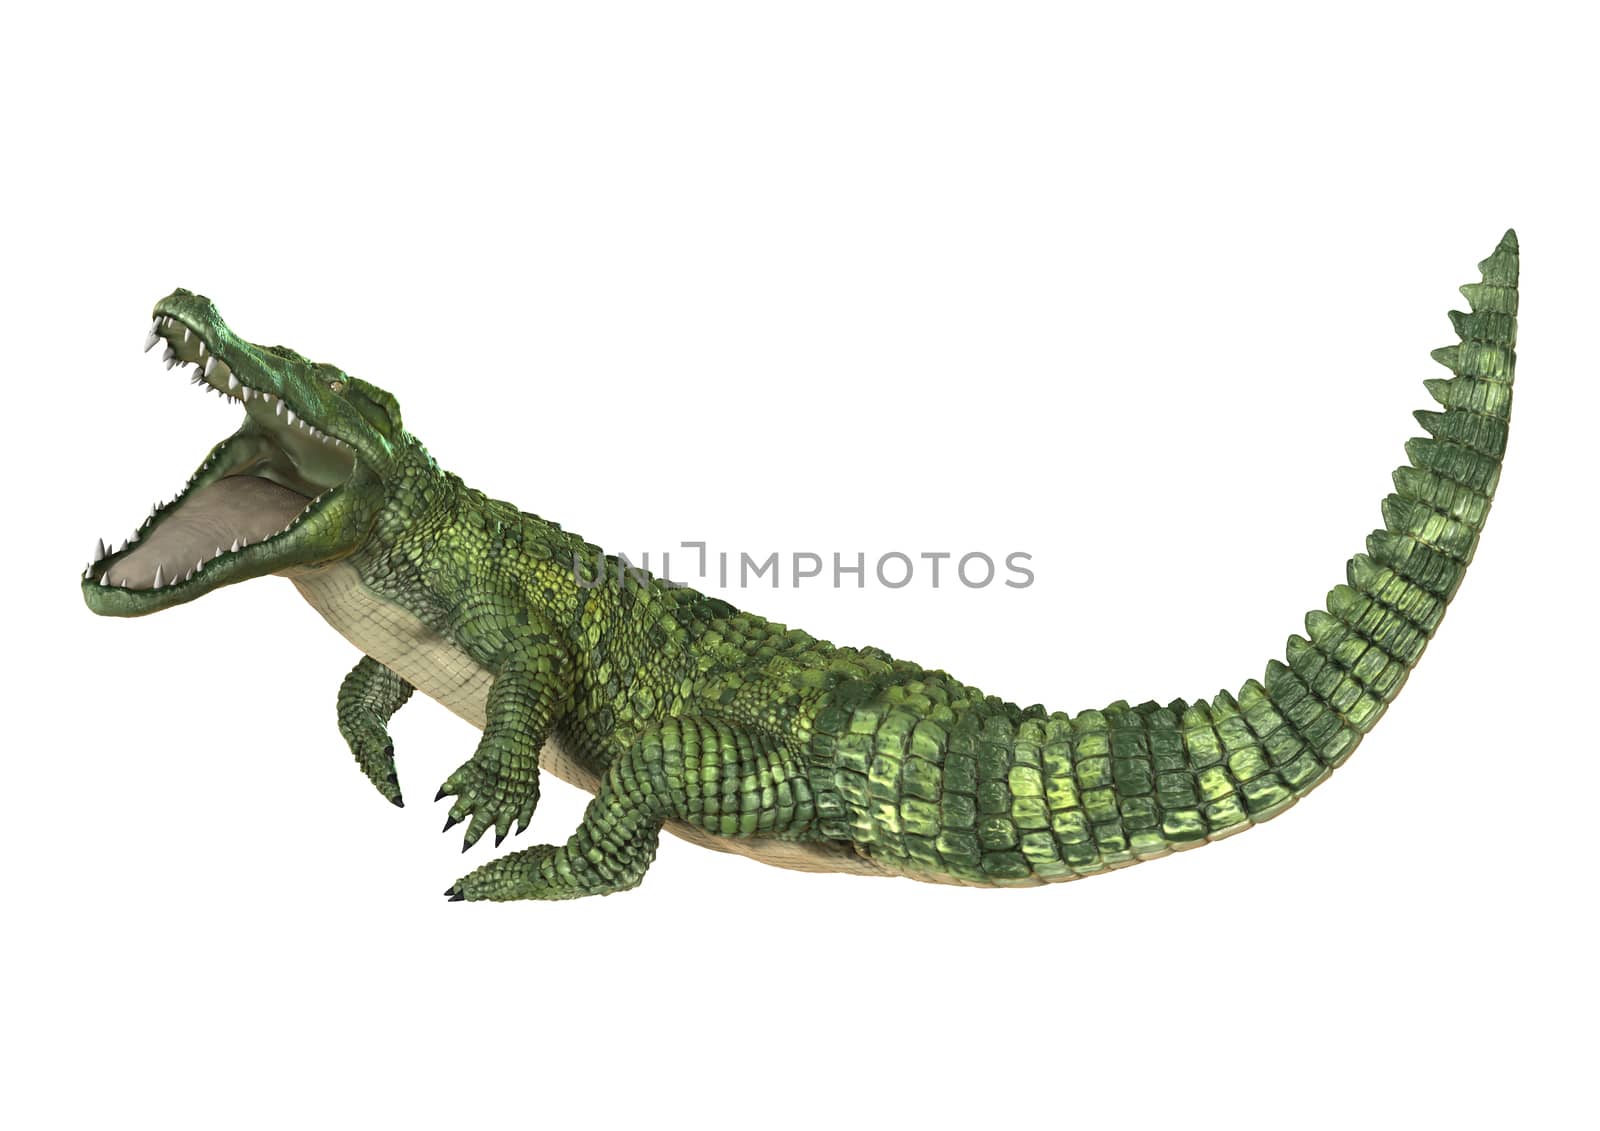 3D digital render of a green crocodile isolated on white background